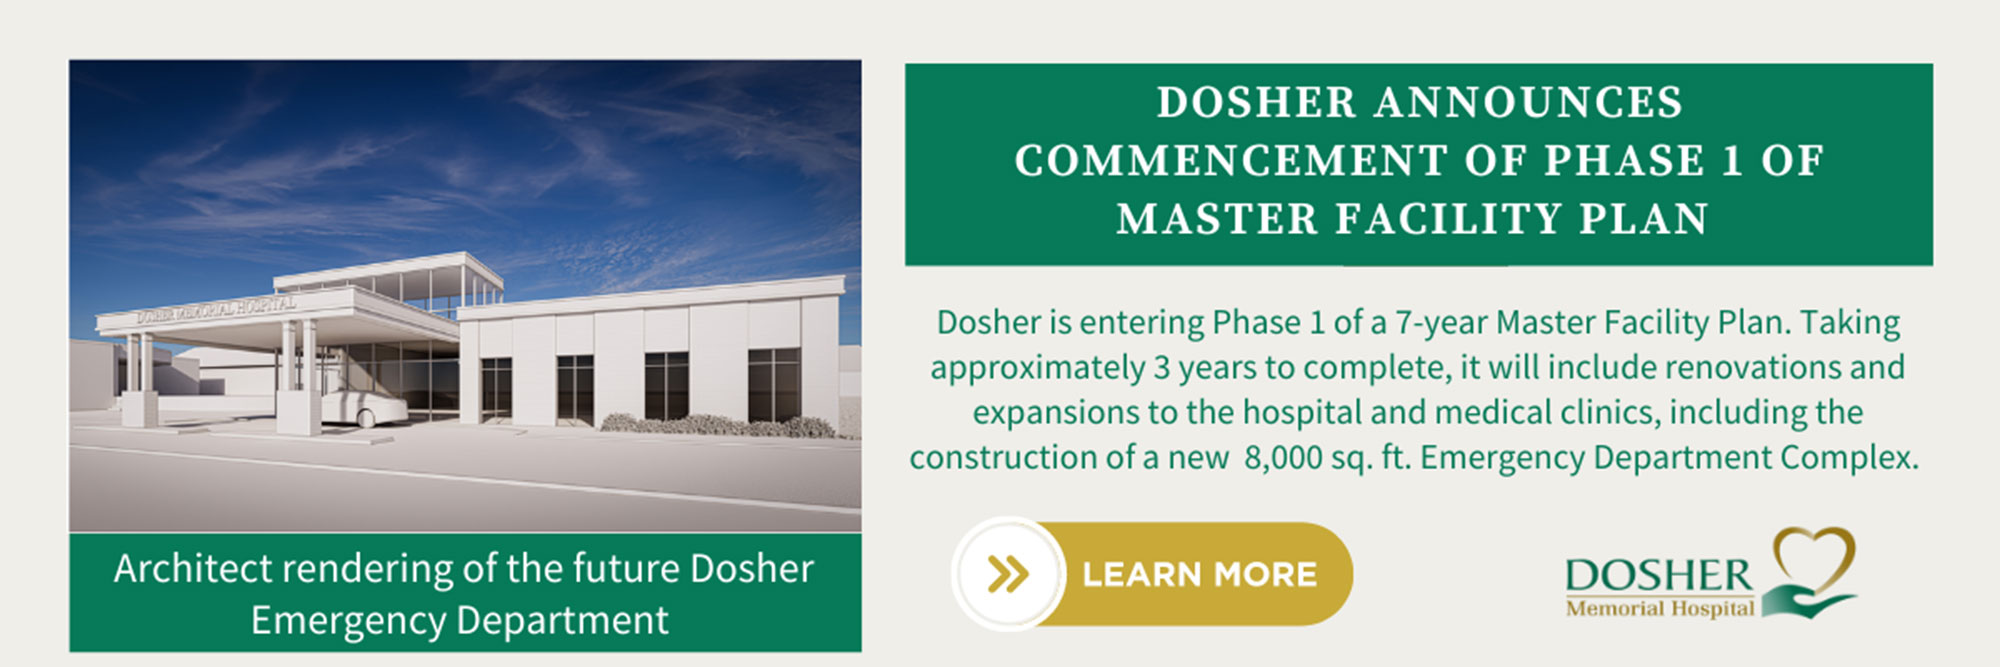 DOSHER ANNOUNCES COMMENCEMENT OF PHASE 1 OF MASTER FACILITY PLAN

Dosher is entering Phase 1 of a 7-year Master Facility Plan. Taking approxiably 3 years to complete, it will include renovations and expansions to the Hospital and Medical Clinics, including the construction of a new 8,000 sq. ft. Emergency Department Complex.

DOSHER Memorial Hospital

Architect rendering of the future Dosher Emergency Department




DOSHER ANNOUNCES COMMENCEMENT OF PHASE 1 OF MASTER FACILITY PLAN



Dosher is entering Phase 1 of a 7-year Master Facility Plan. Taking approximately 3 years to complete, it will include renovations and expansions to the Hospital and Medical Clinics, including the construction of a new 8,000 sq. ft. Emergency Department Complex.


LEARN MORE


DOSHER
Memorial Hospital